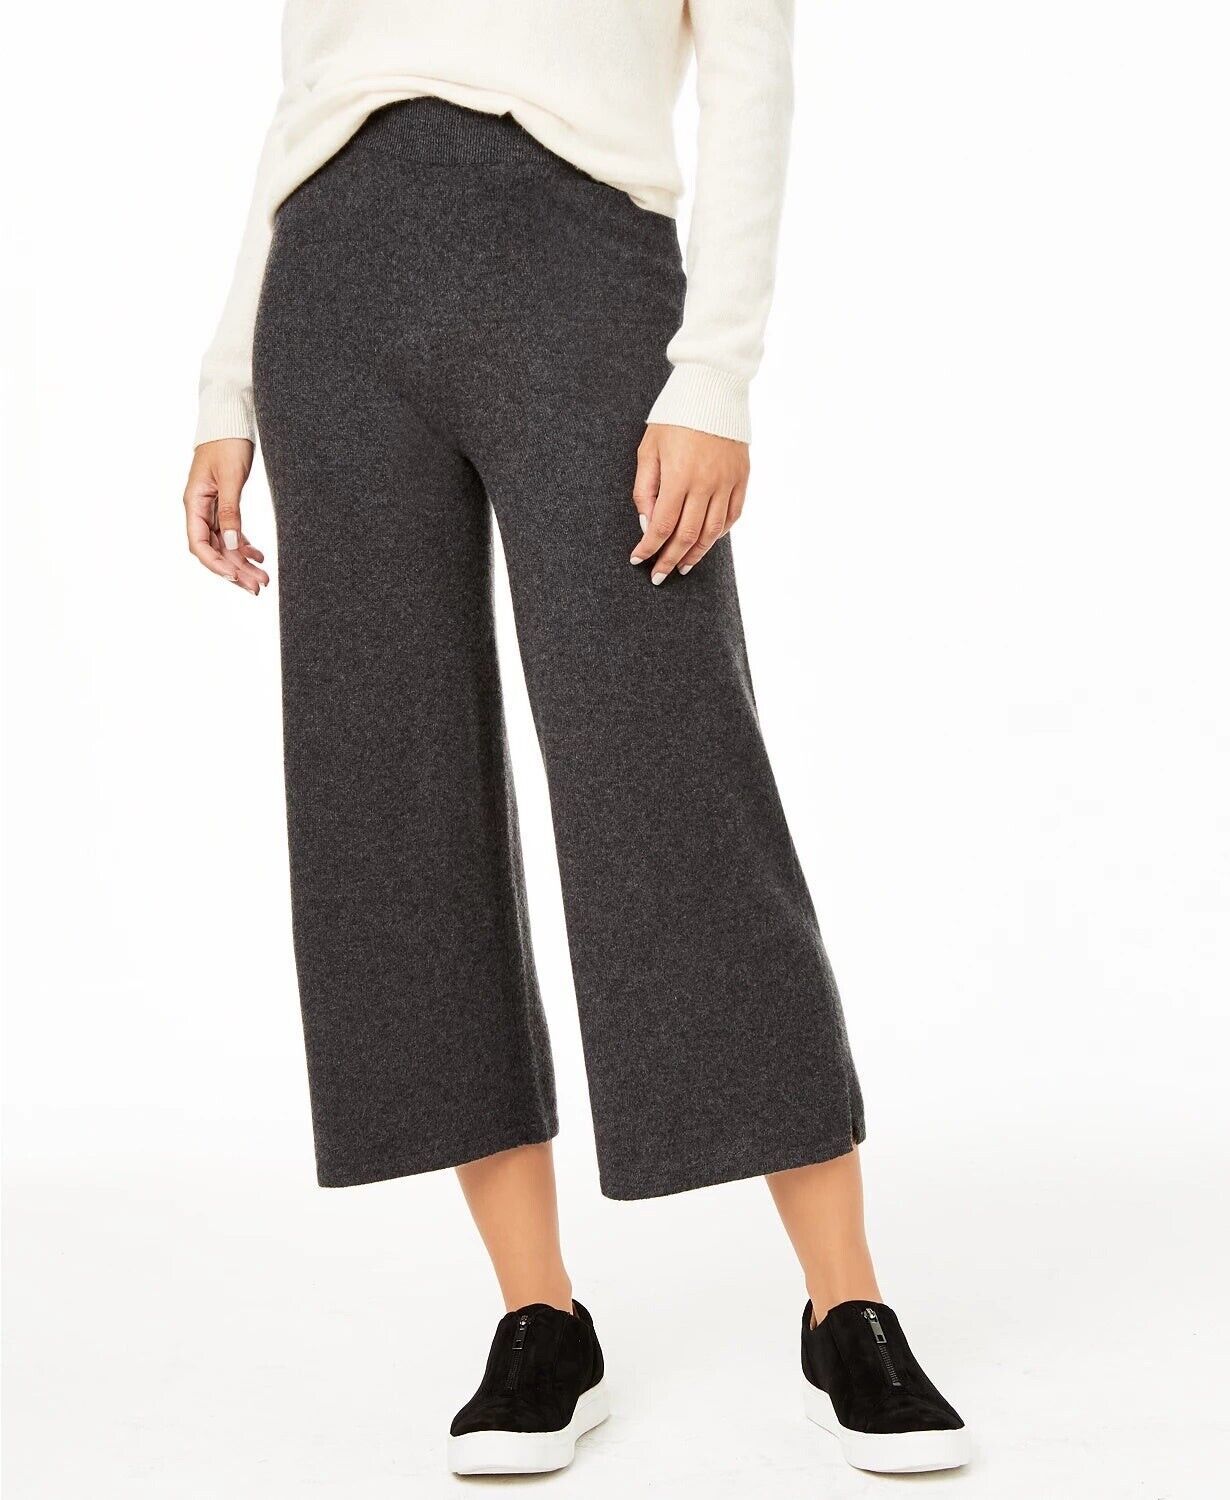 Primary image for NEW CHARTERS CLUB GRAY CASHMERE WIDE LEG PANTS SIZE XL $199